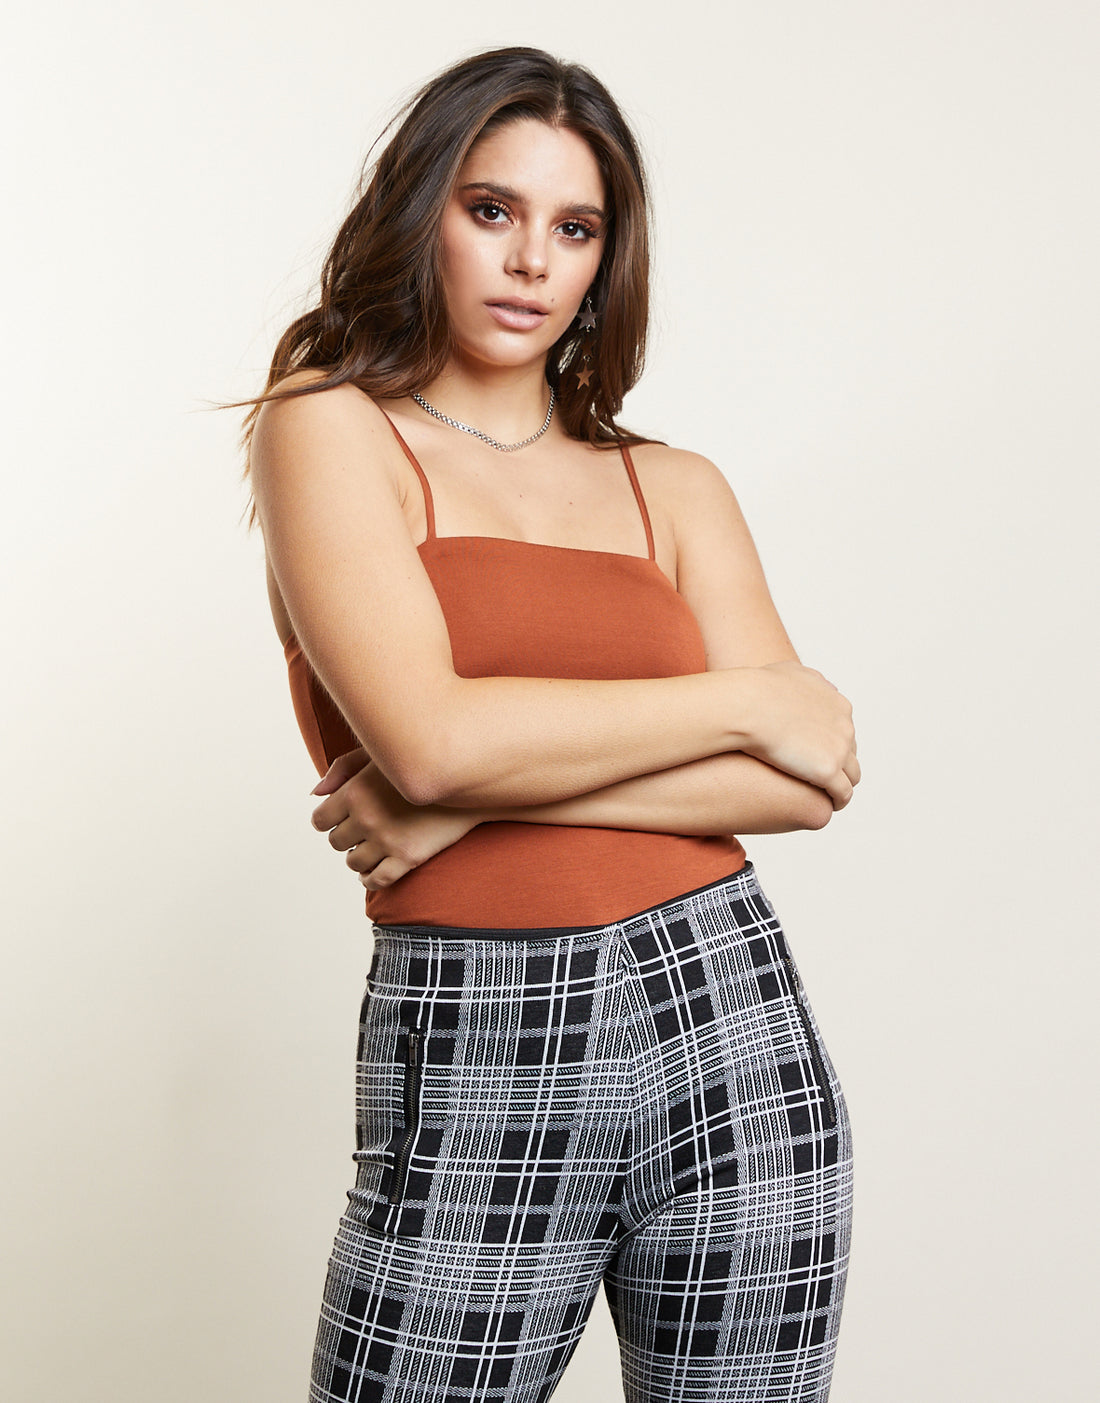 Perfect Fit Cami tops Rust Small -2020AVE